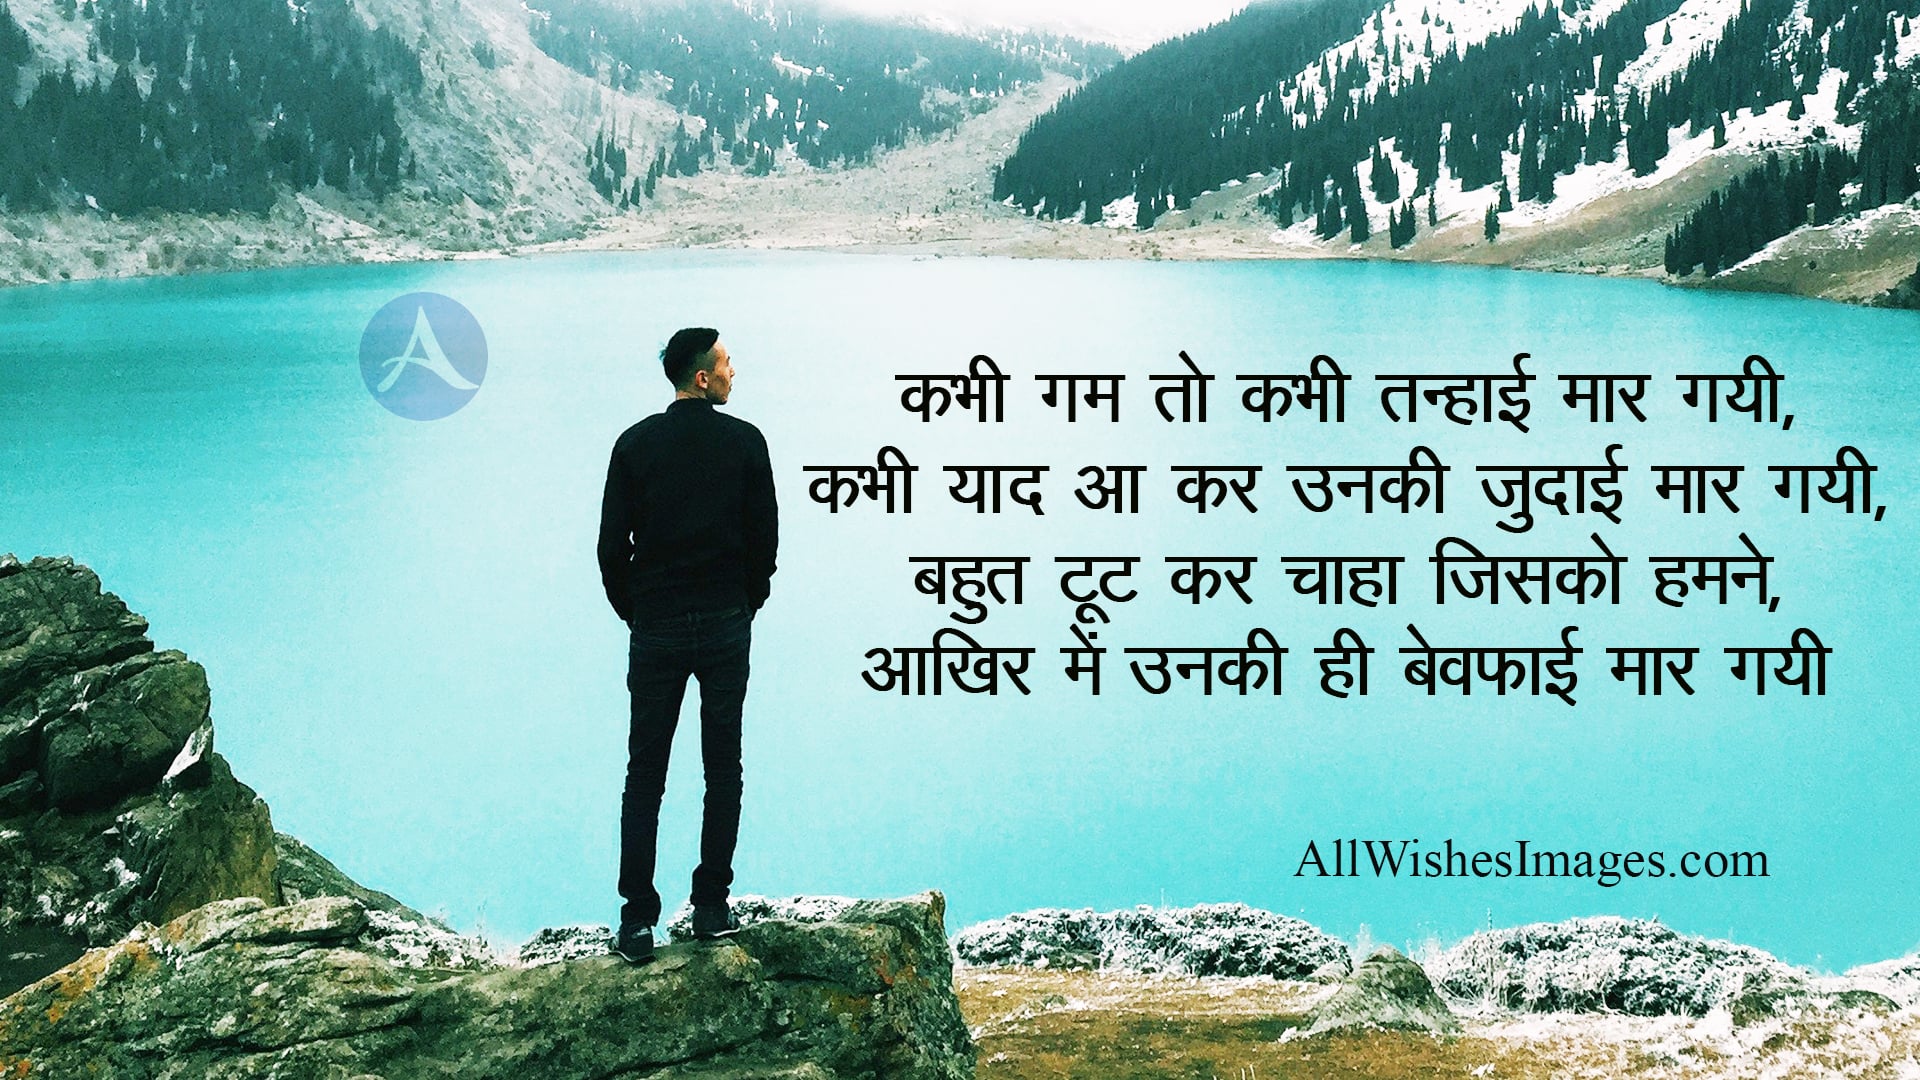 Bewafa Shayari Image For Bf - All Wishes Images - Images for WhatsApp